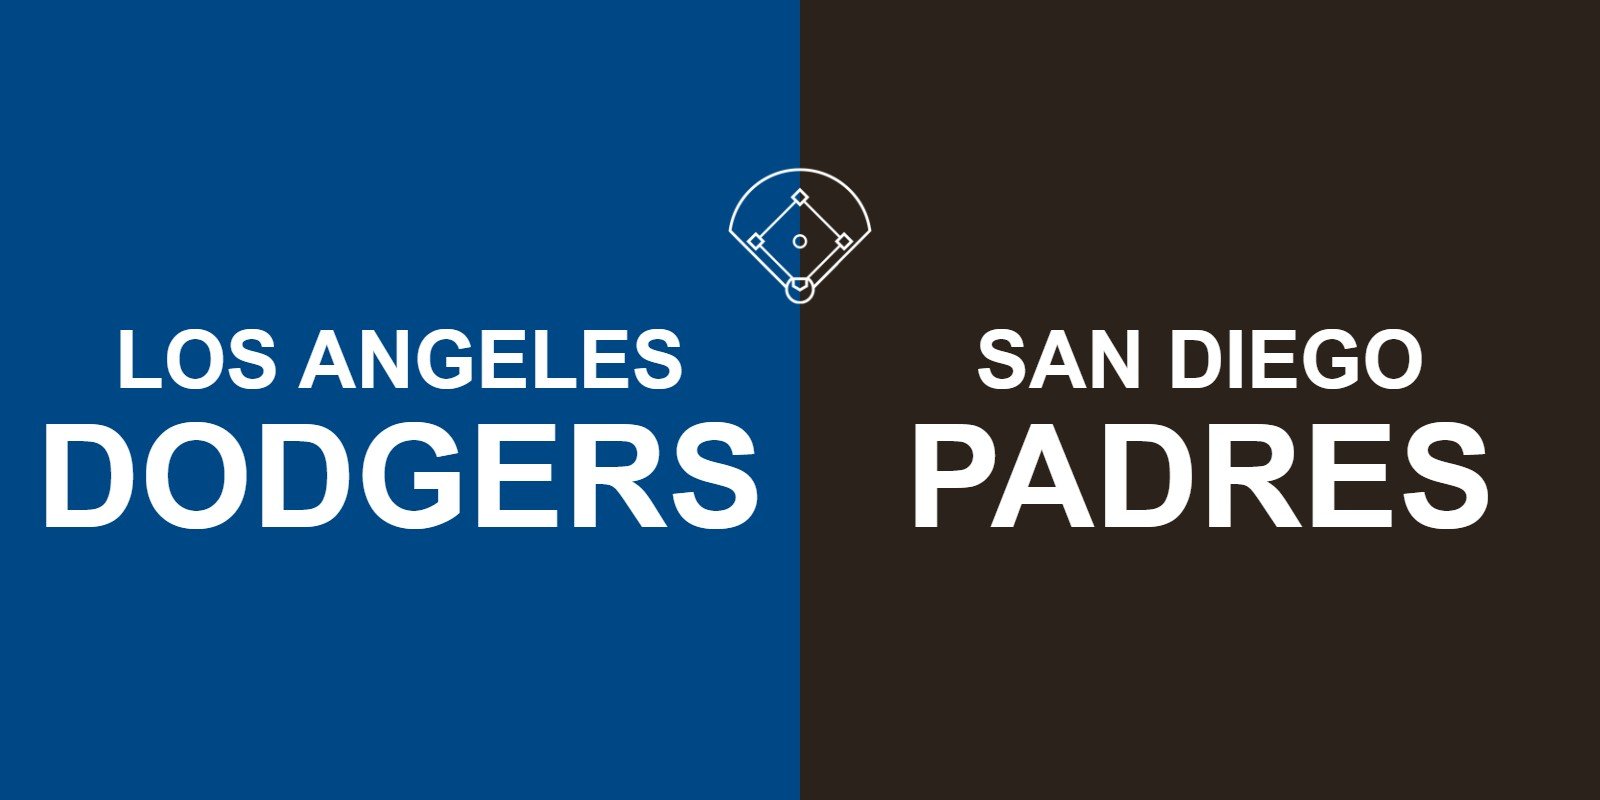 Dodgers vs Padres Tickets